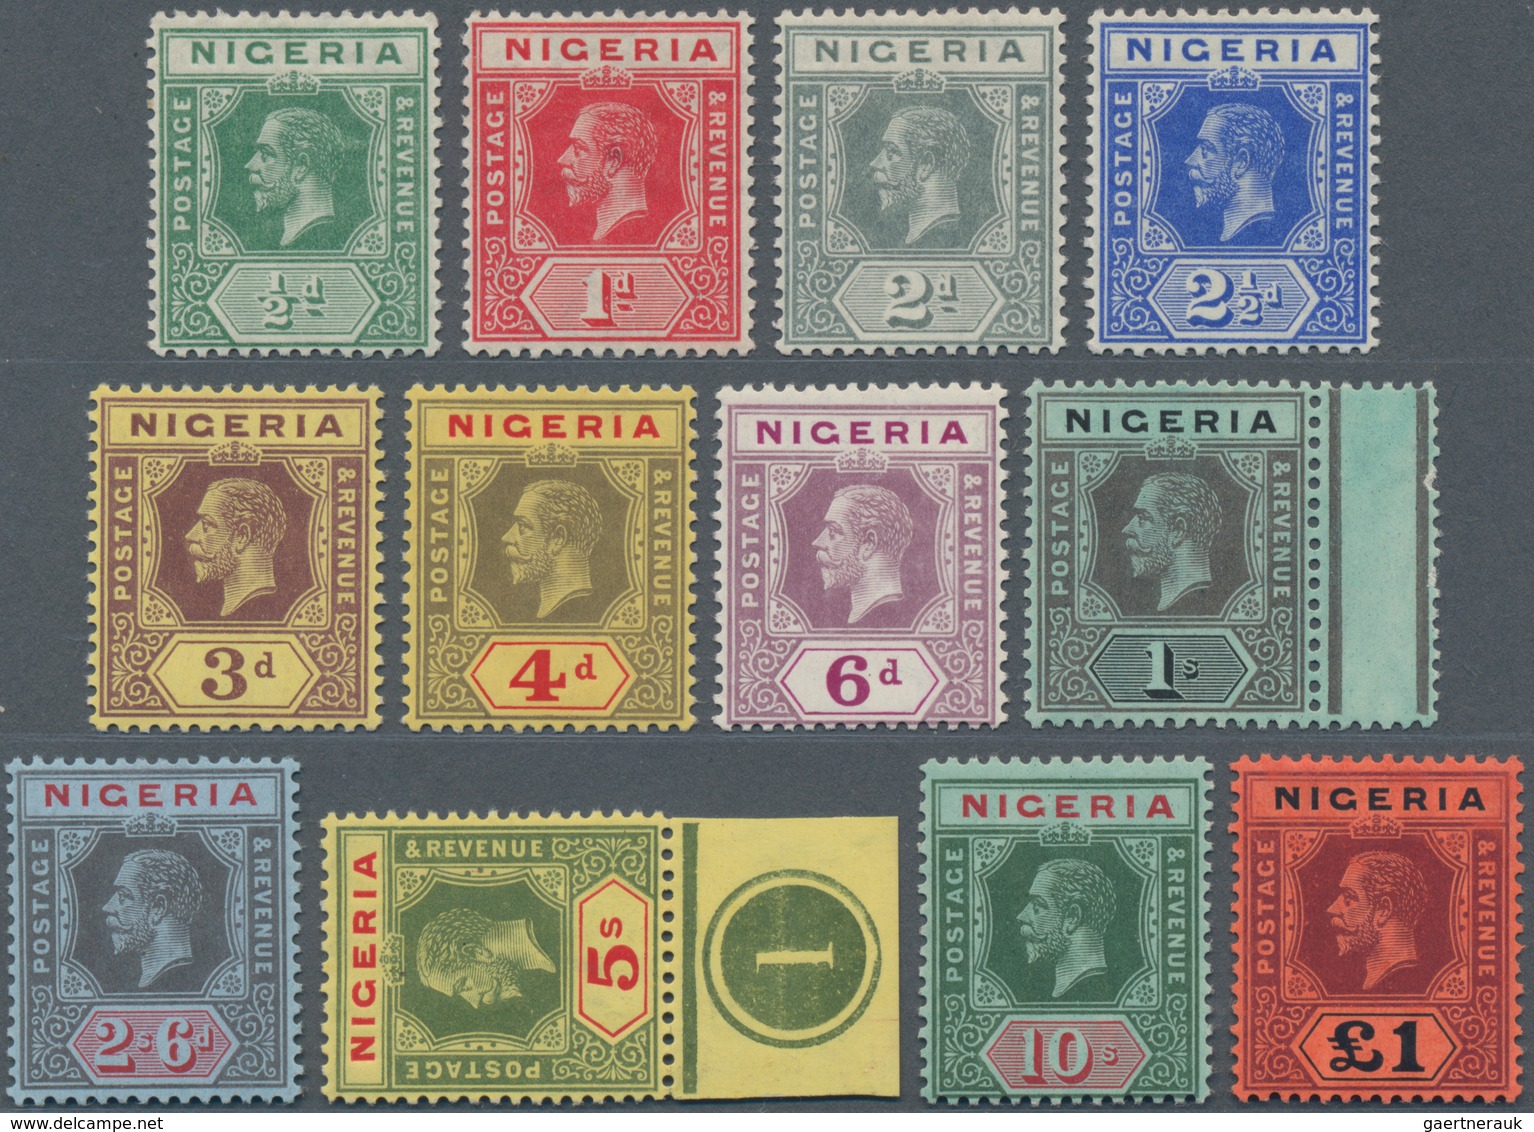 Nigeria: 1914, KGV Definitives Complete Set To £1 With Wmk. Mult. Crown CA, Mint Lightly Hinged, SG. - Nigeria (...-1960)